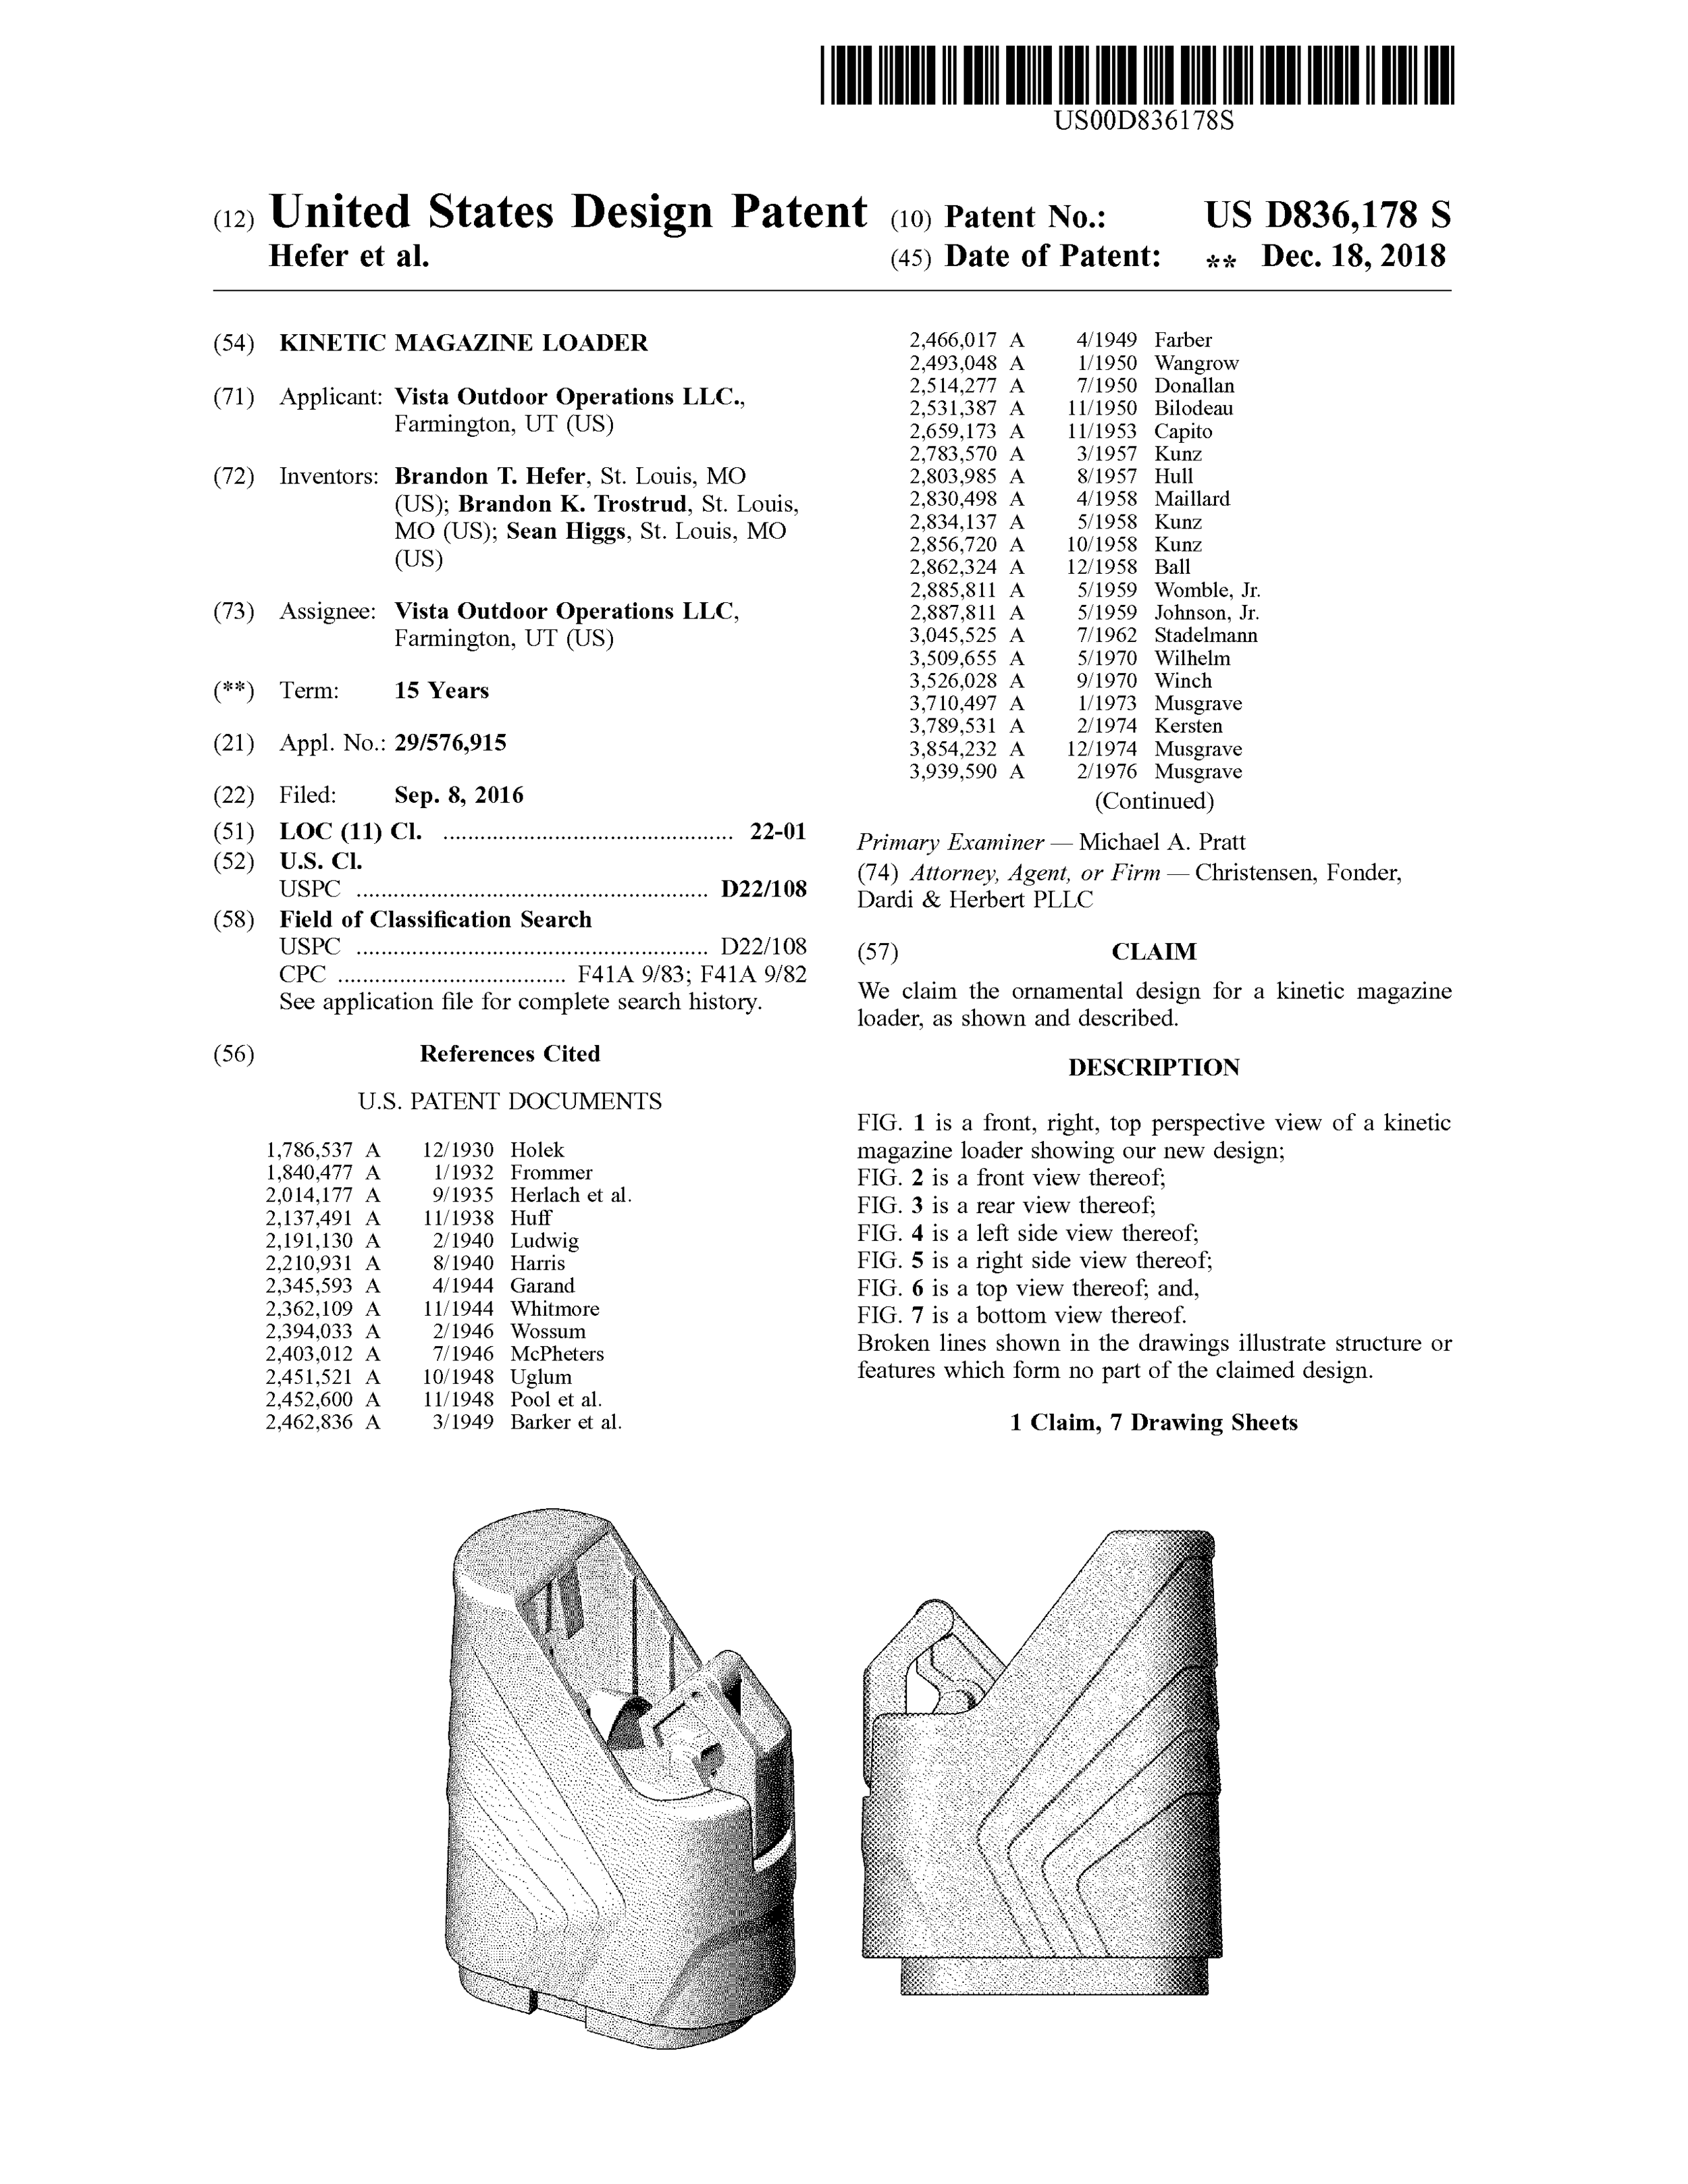 USD836178 - Kinetic Magazine Loader_Page_1.png